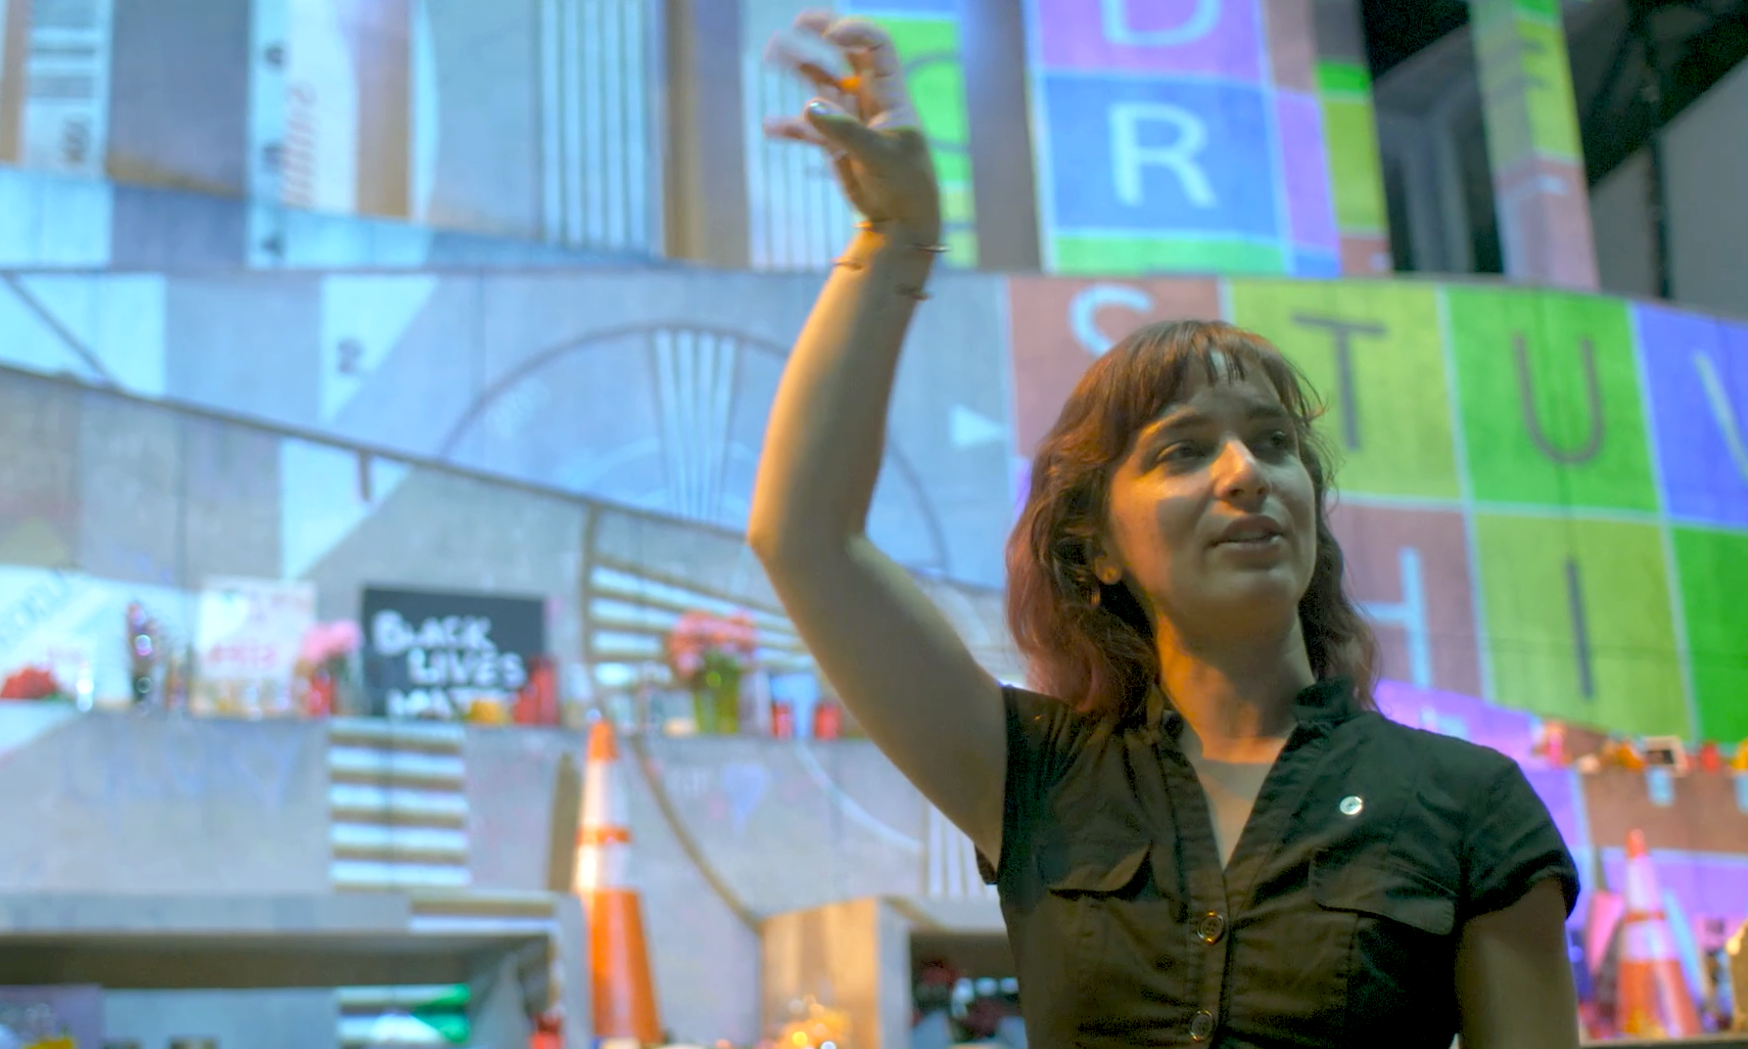 Katherine Freer, a white woman with long brown hair wearing a black dress, gestures at the slightly out of focus stage for a production of Antigone, where the architecture is illuminated by the projections of a colorful focus grid.